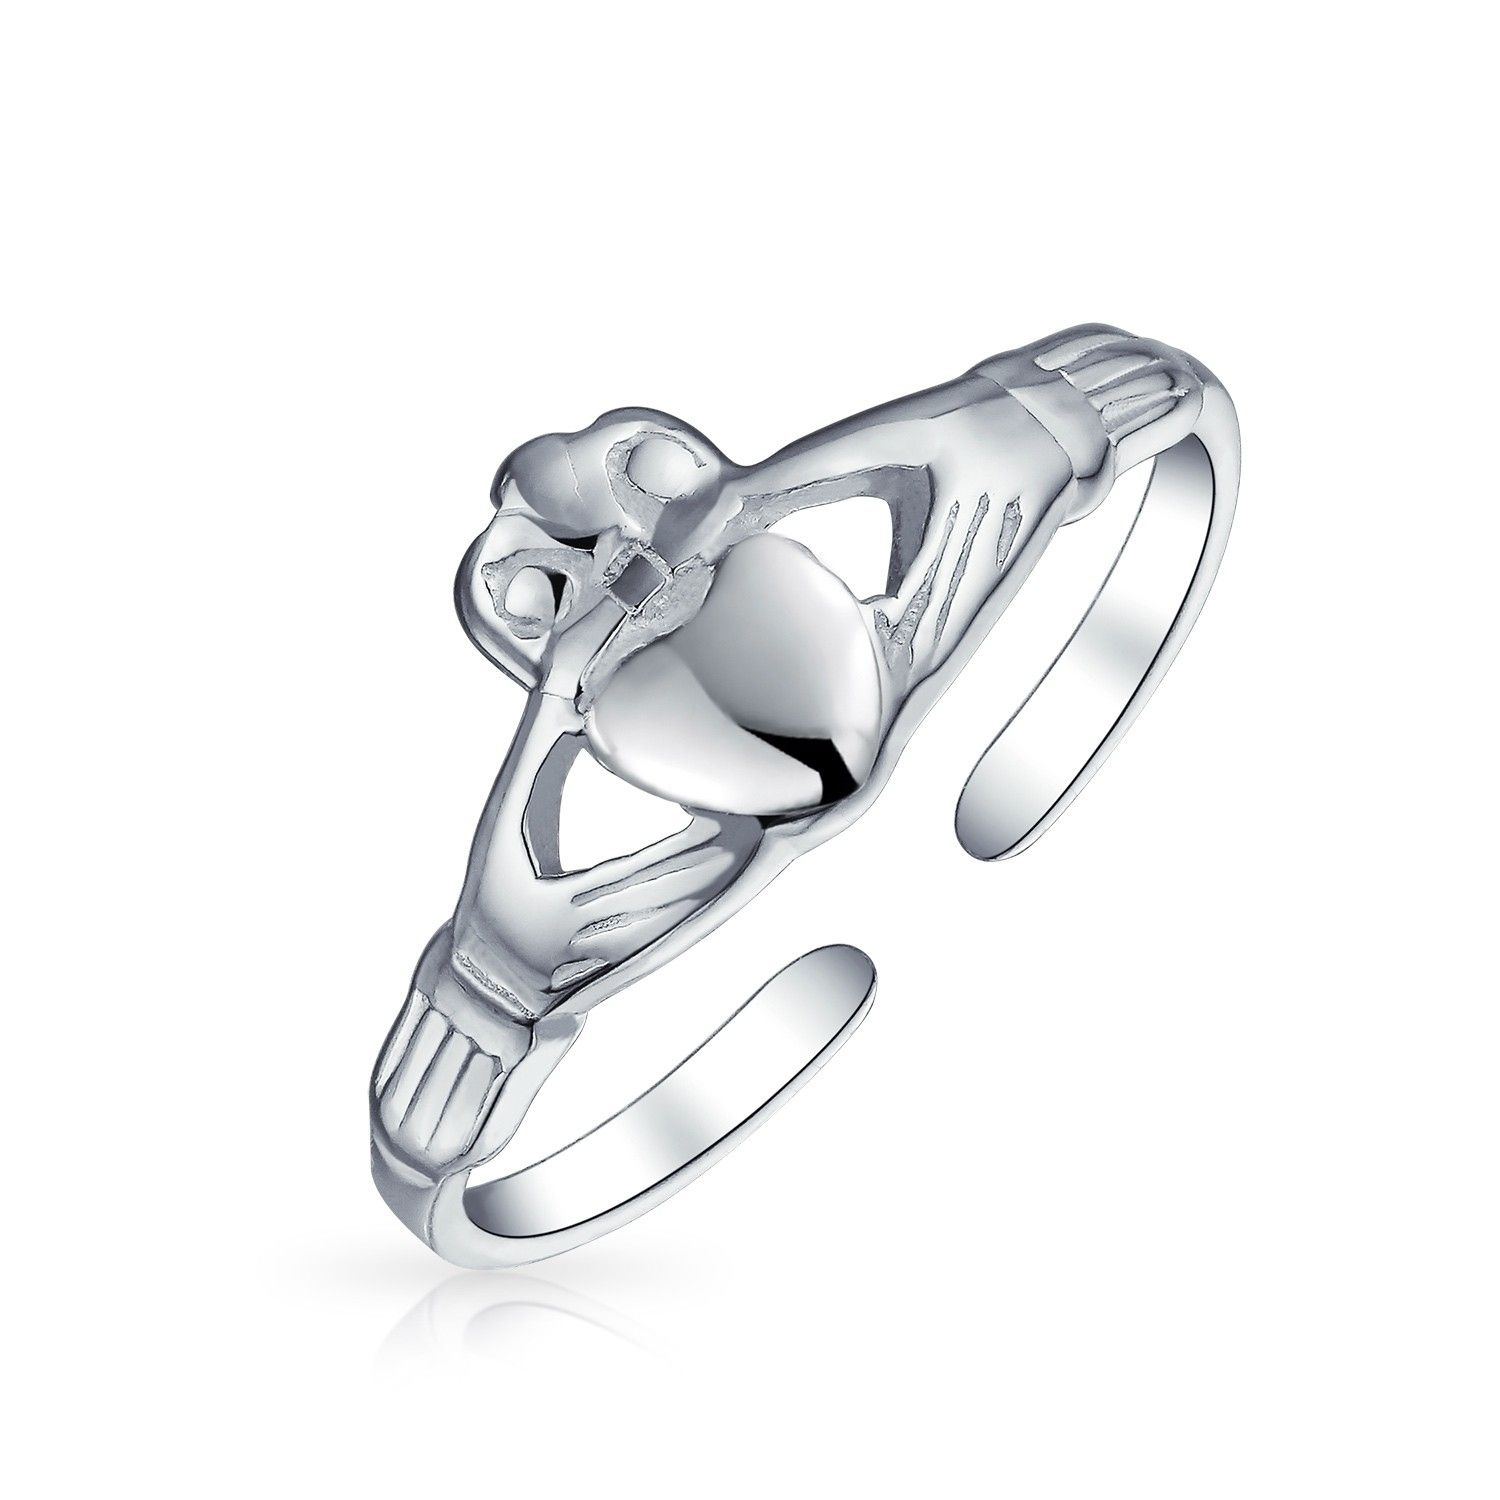 925 Silver Celtic Midi Ring Adjustable Claddagh Heart Toe Rings With Latest Heart Toe Rings (View 5 of 15)